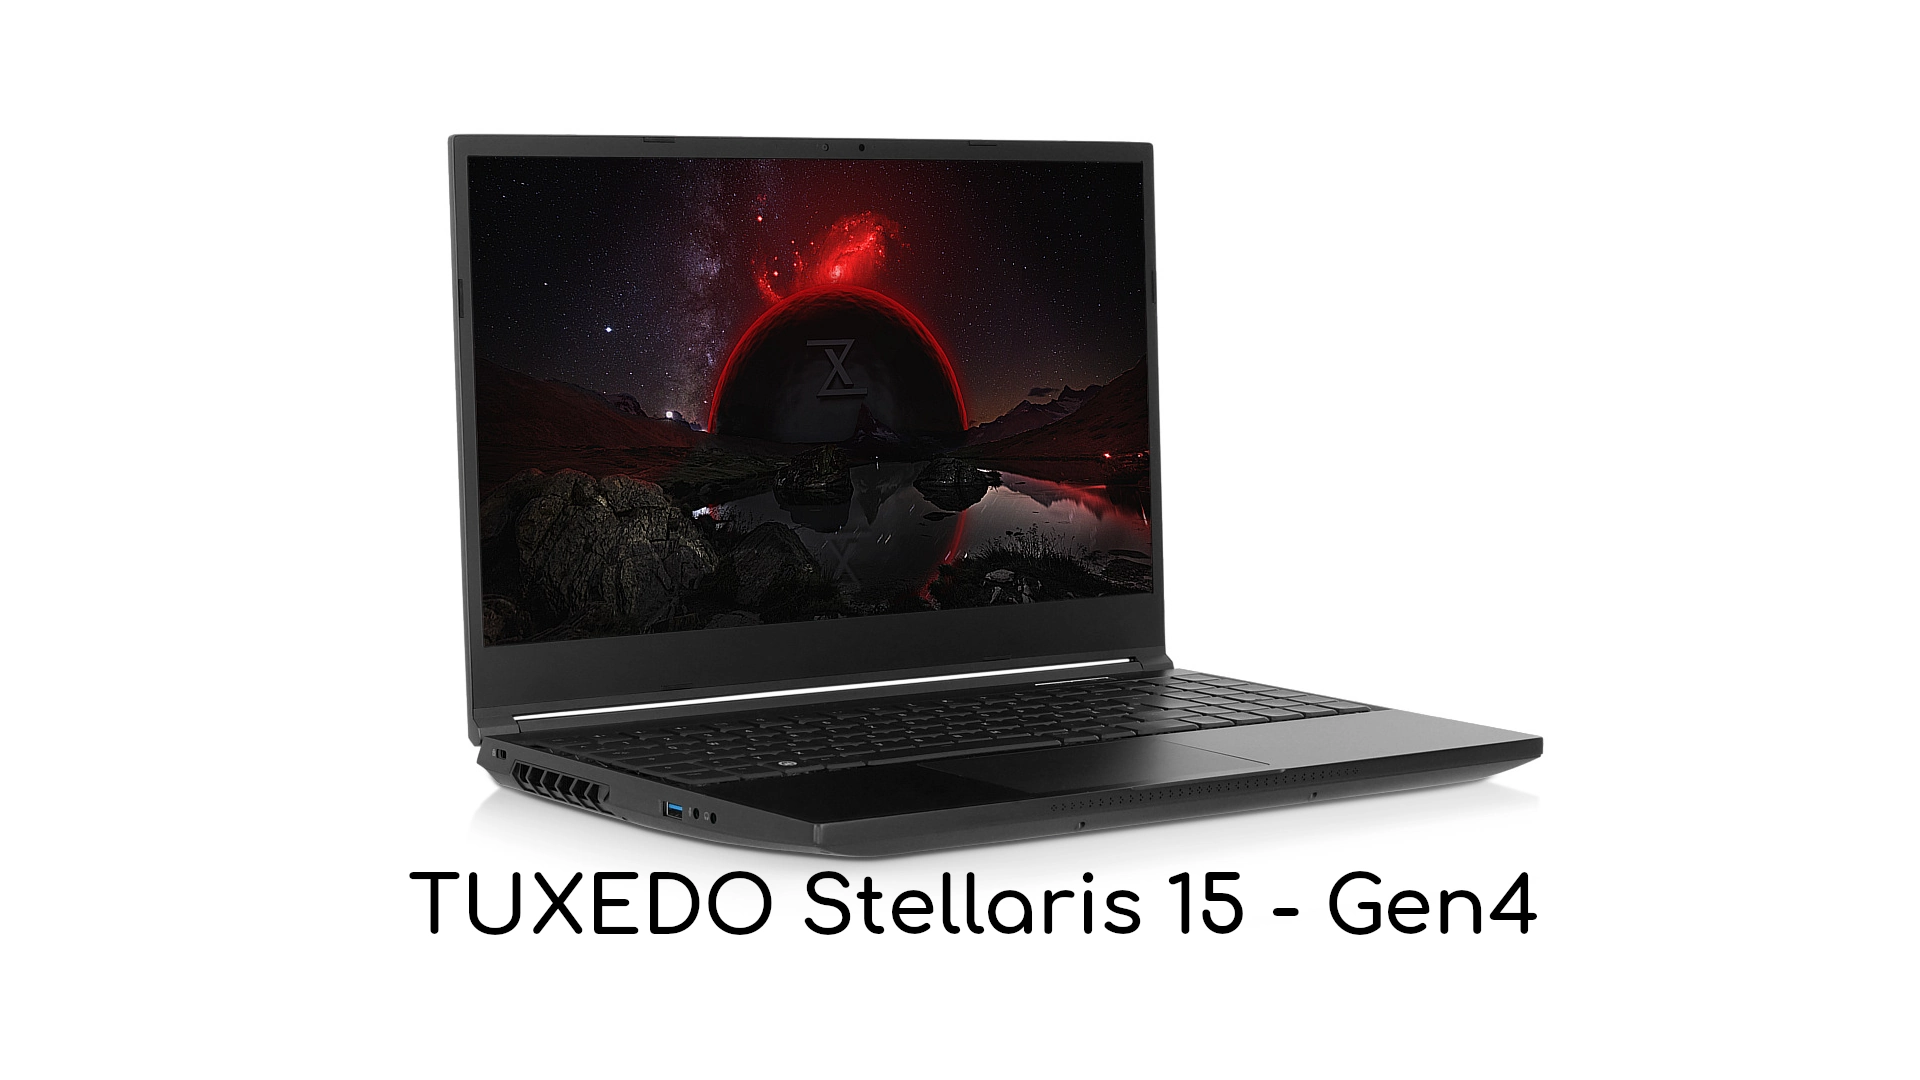 TUXEDO Stellaris 15 Is the First Linux Laptop to Come Pre-Installed with Ubuntu 22.04 LTS